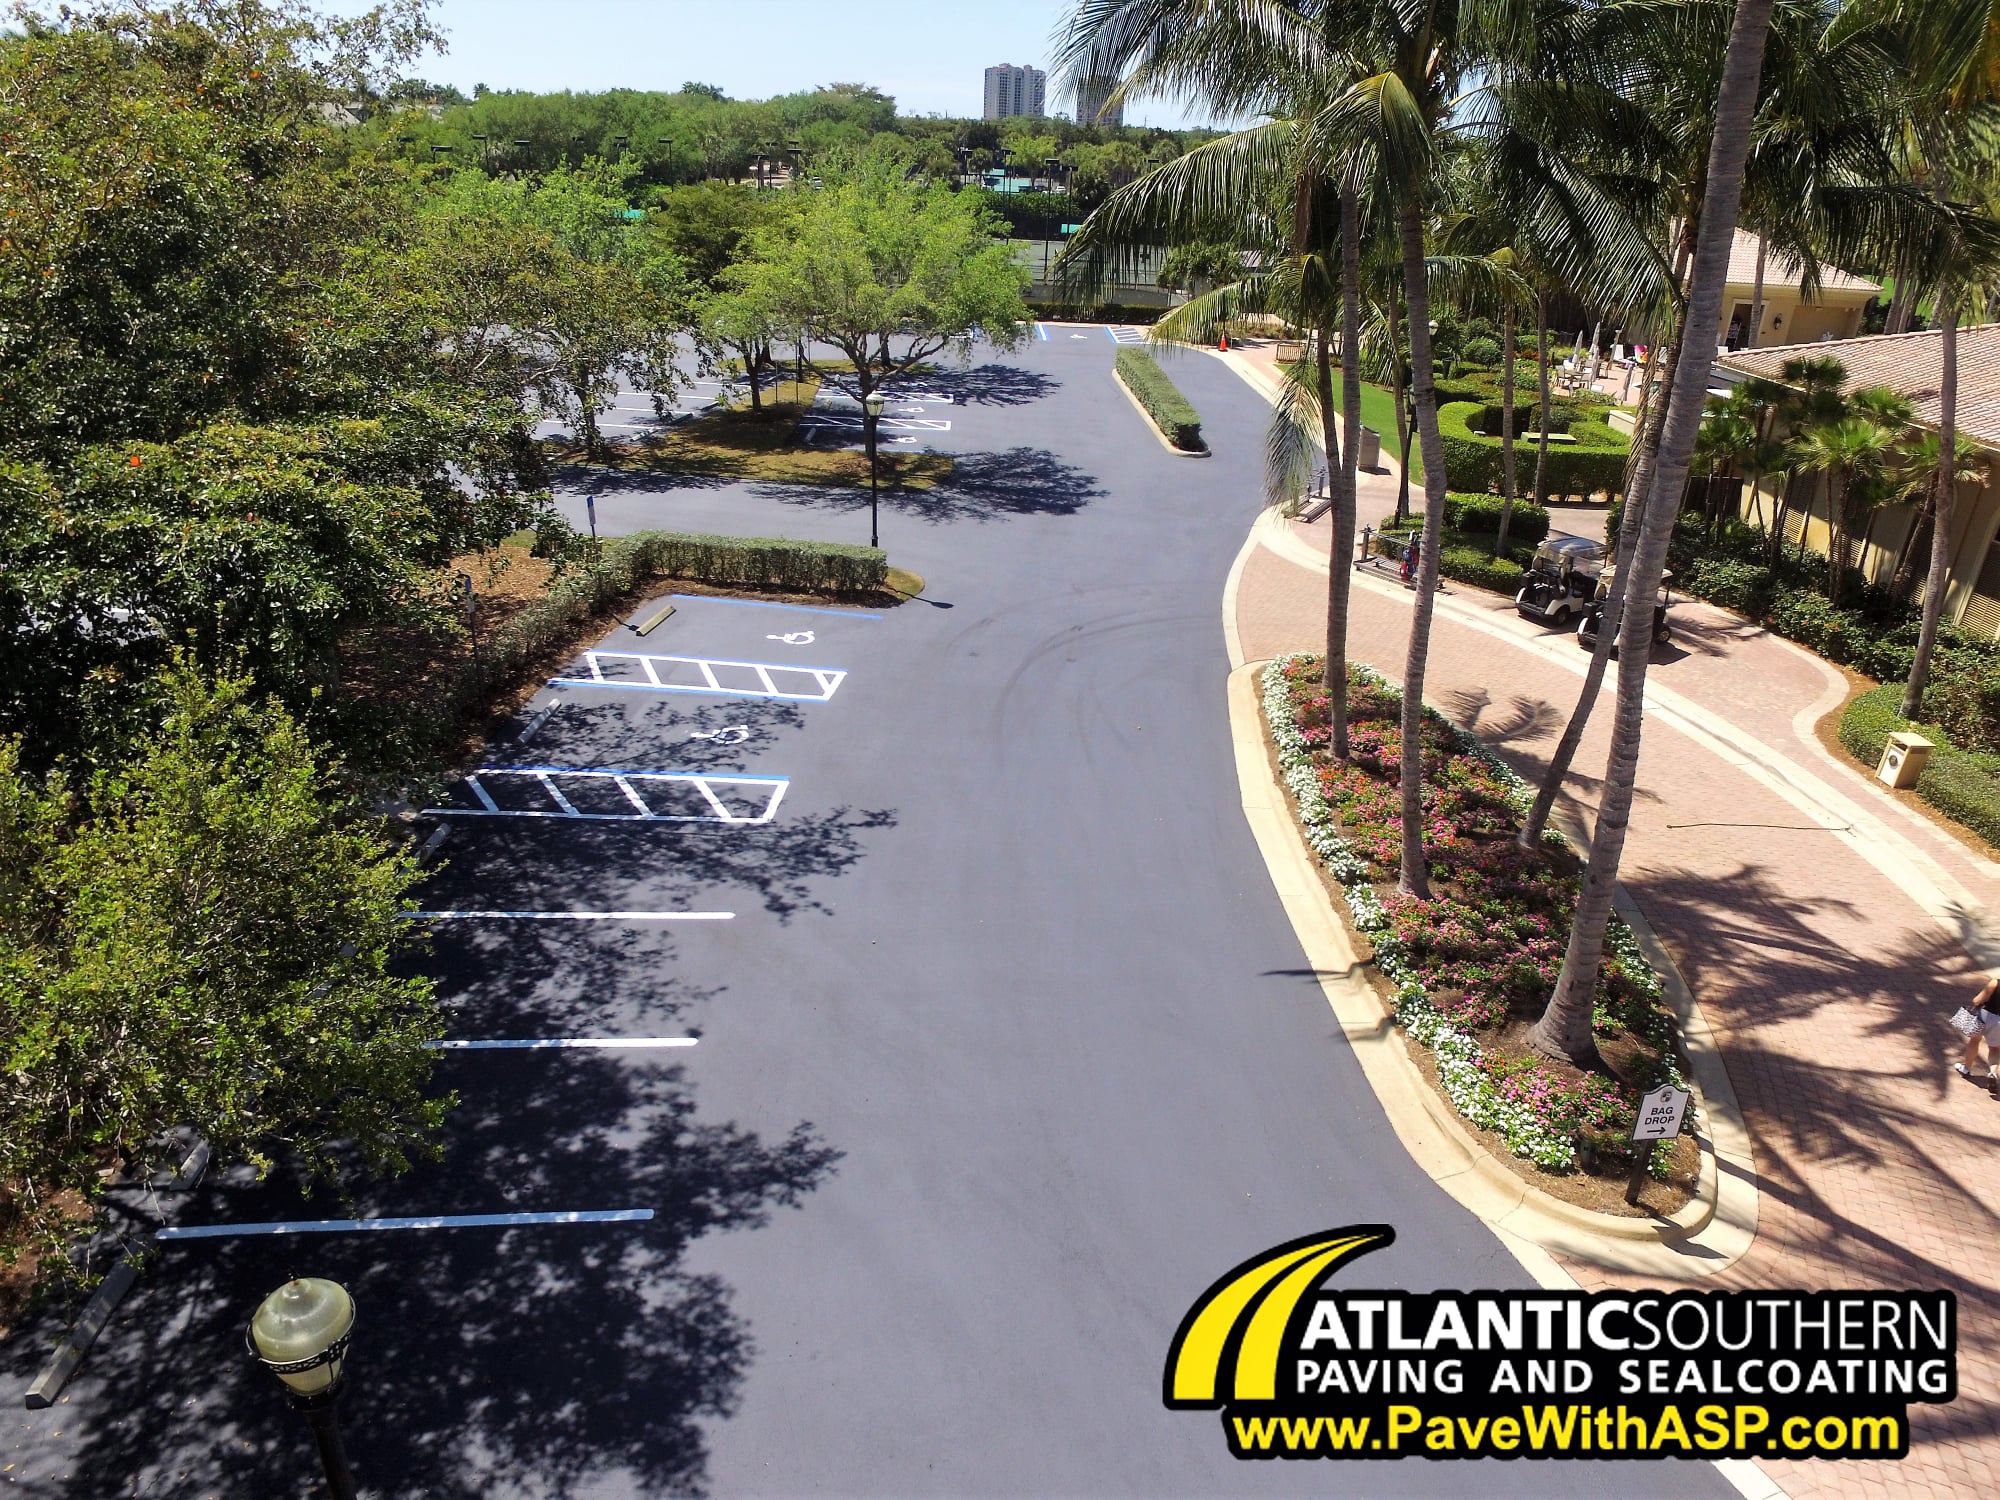 Another seal and stripe completed by our ASPCrew in Florida!.  PaveWithASP for all of your parking lot maintenance needs by calling 1-833-PAVE-ASP